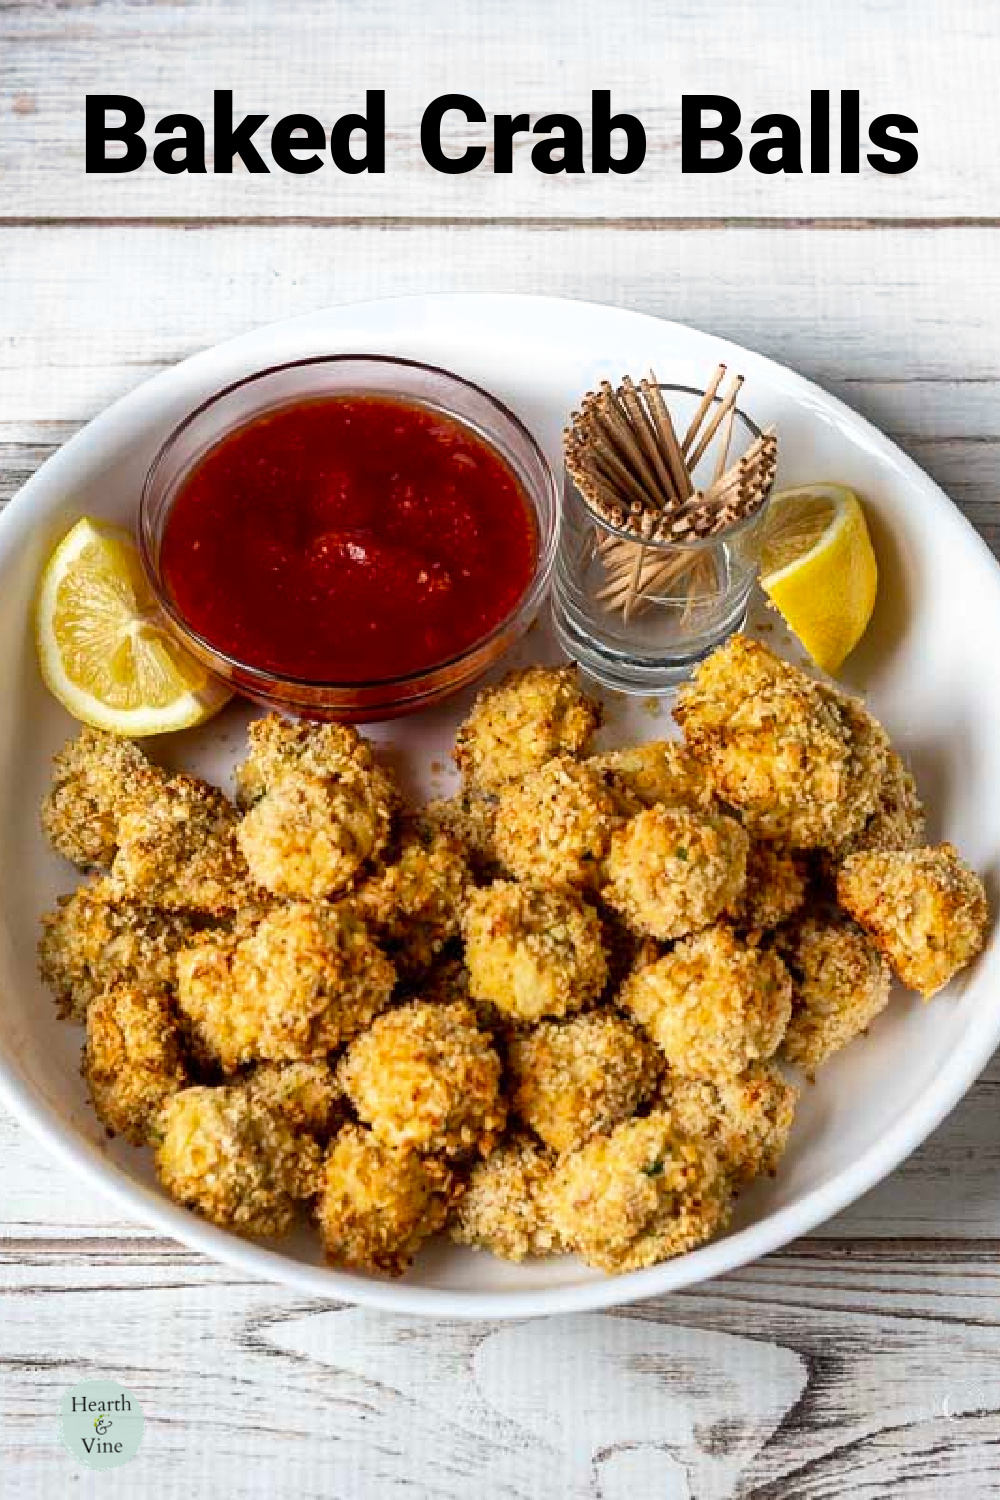 Bowl of crab balls with lemon wedges, toothpicks, and cocktail sauce on the side.